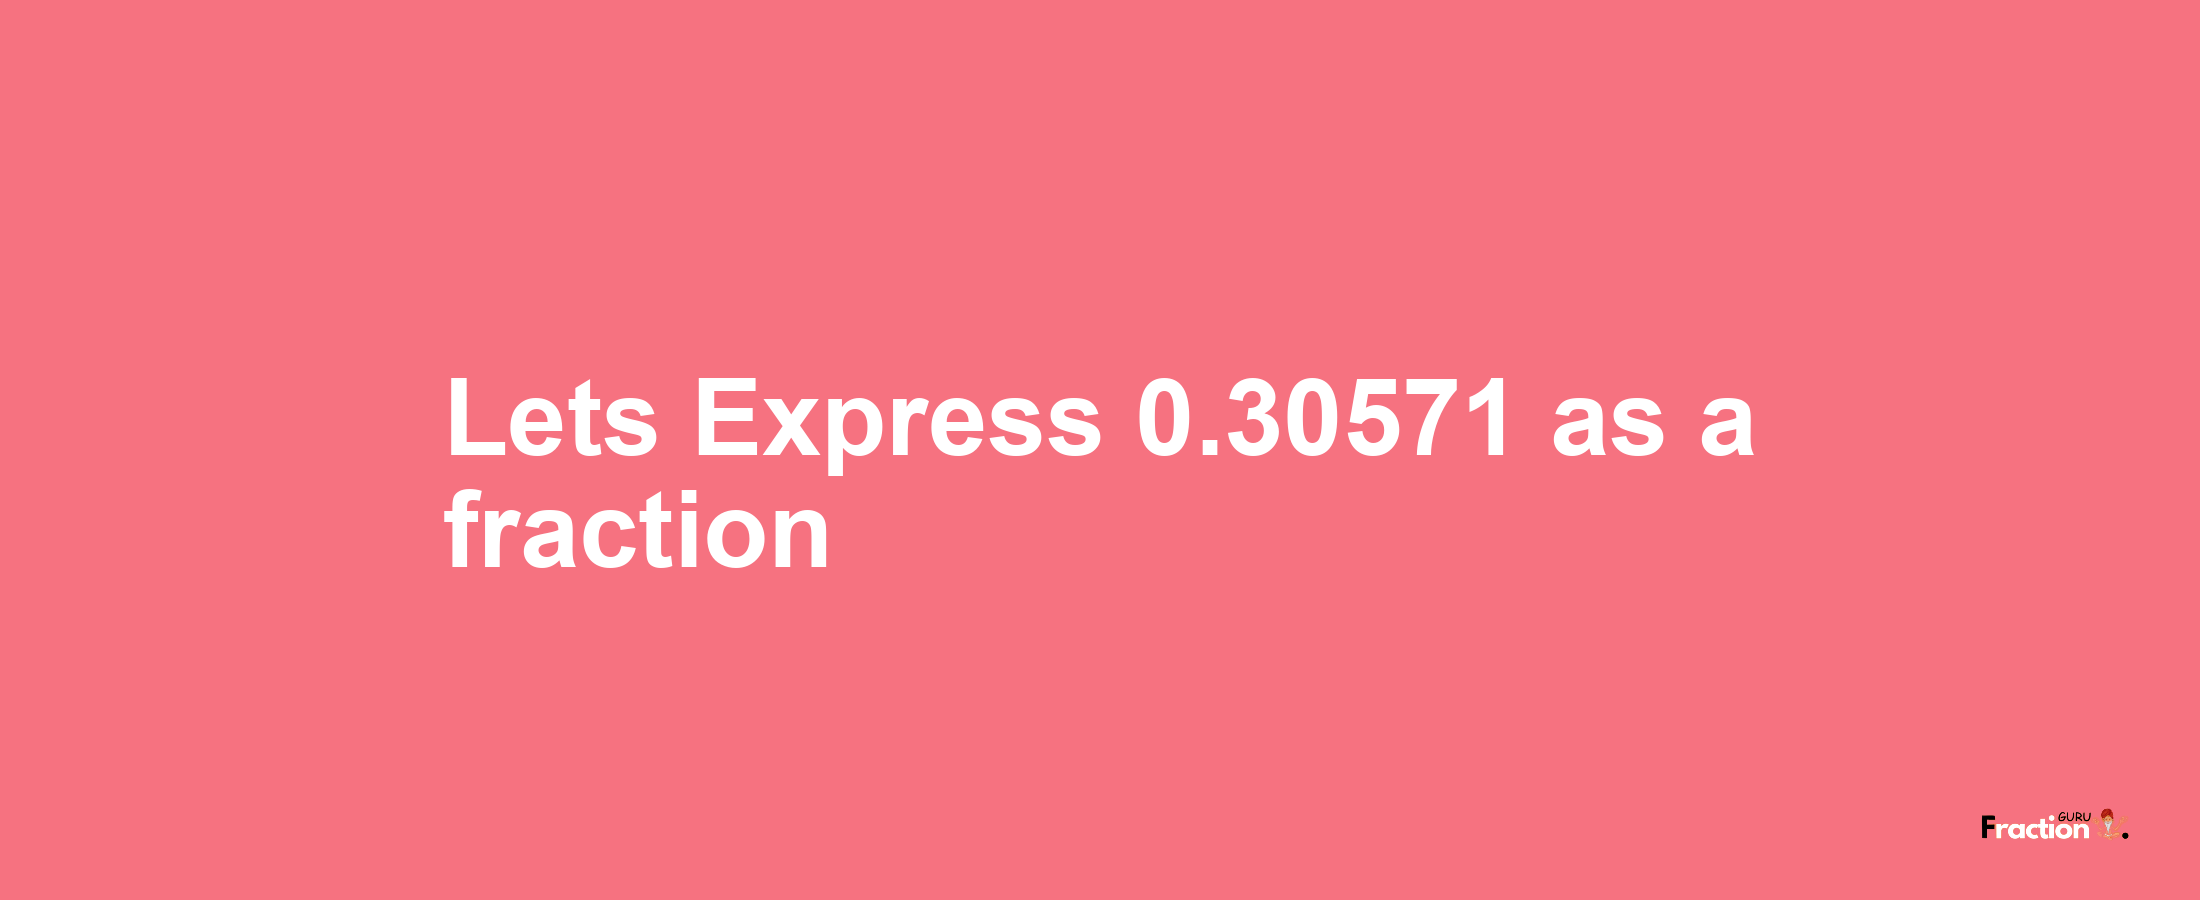 Lets Express 0.30571 as afraction